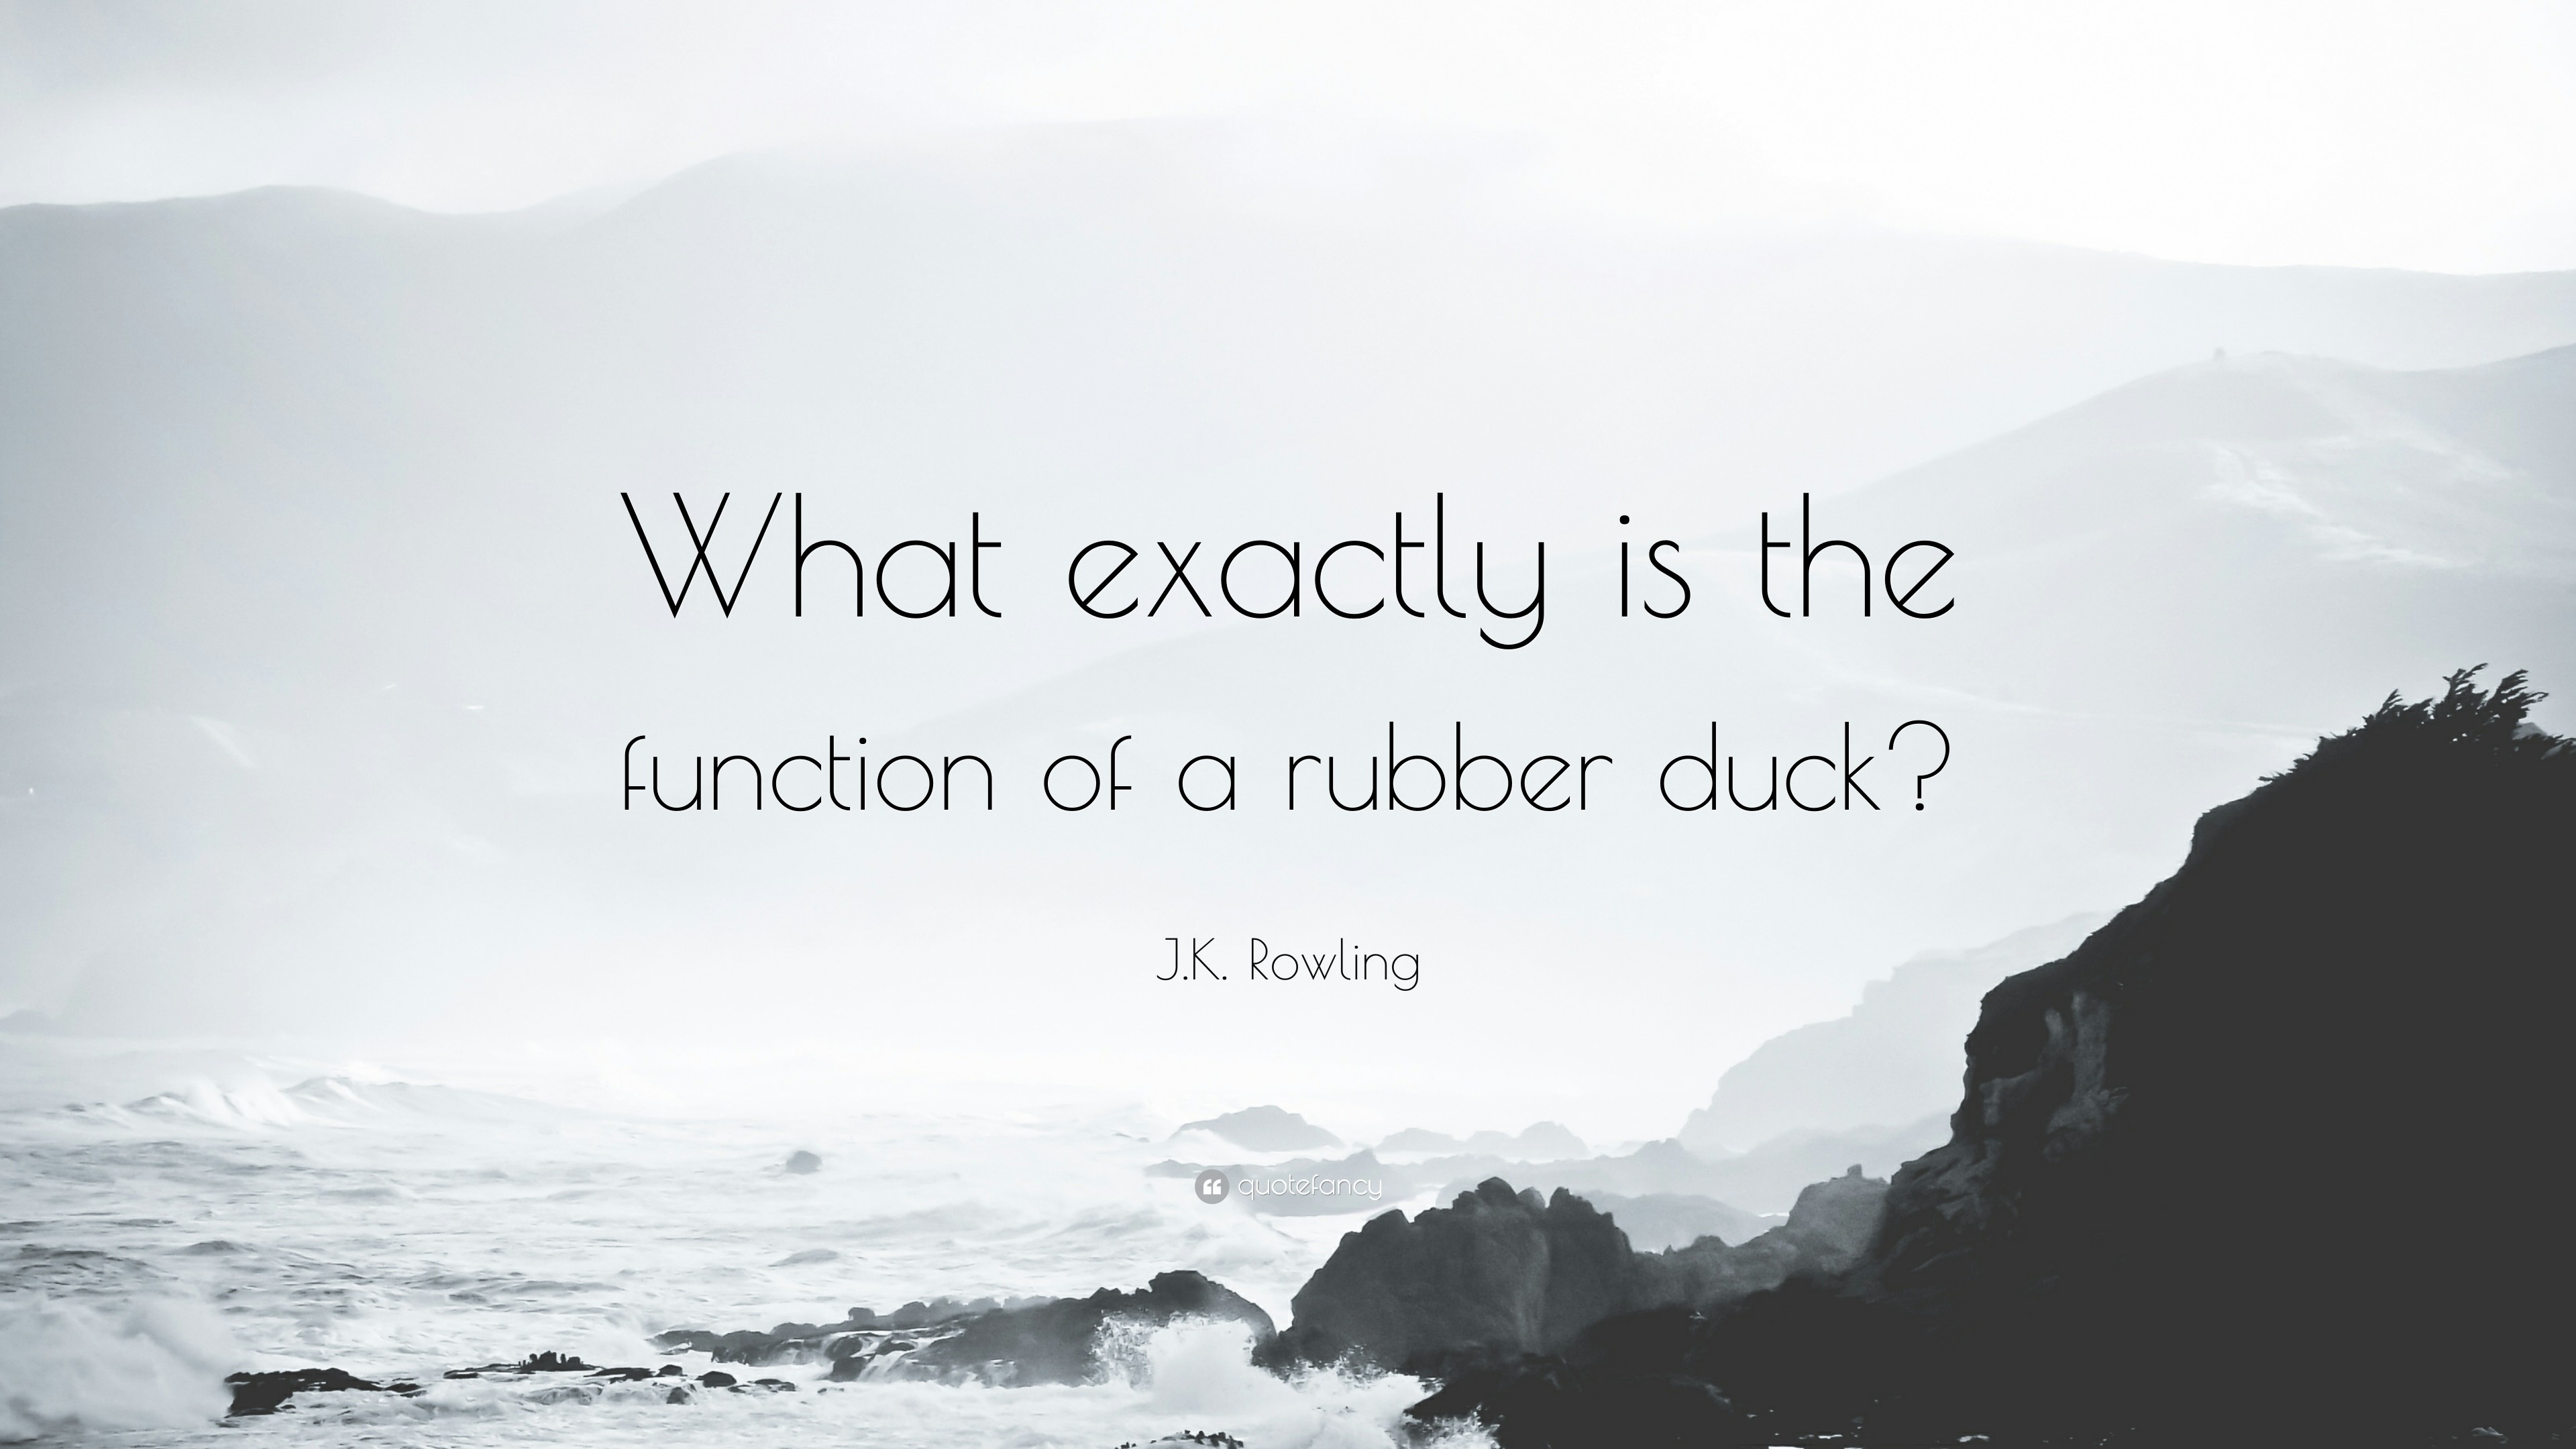 3840x2160 J.K. Rowling Quote: “What exactly is the function of a rubber duck?”